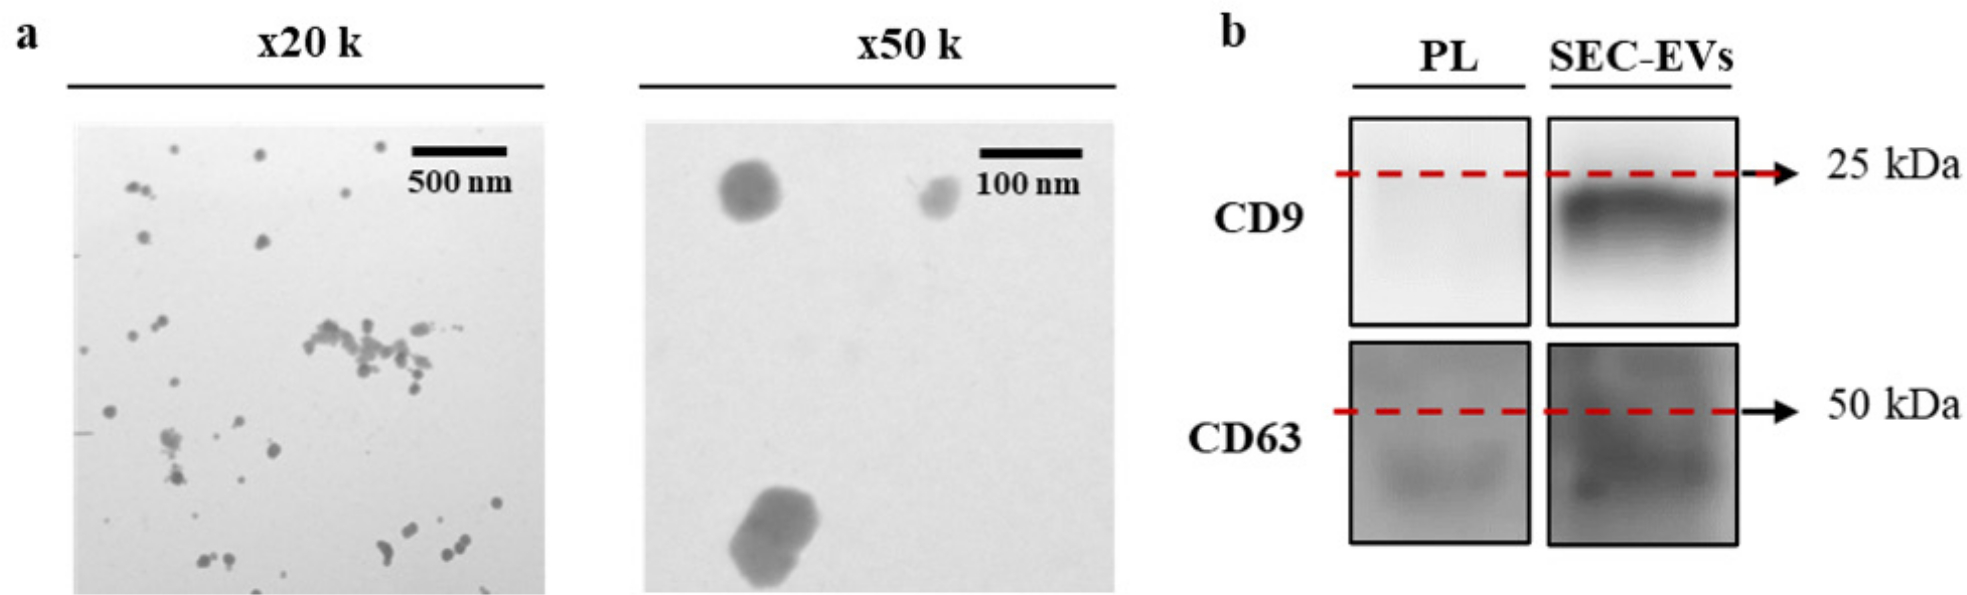 Fig. 4 
            a) Morphological characterization of size exclusion chromatography extracellular vesicles (SEC-EVs) by transmission electron microscopic imaging. Images were taken at ×20,000 augments (wide-field) and ×50,000 augments (close-up). b) Presence of EV biomarkers CD9 and CD63 for platelet lysate (PL) and the SEC-EVs determined by western blot. The same amount of protein was loaded per well (5 μg).
          